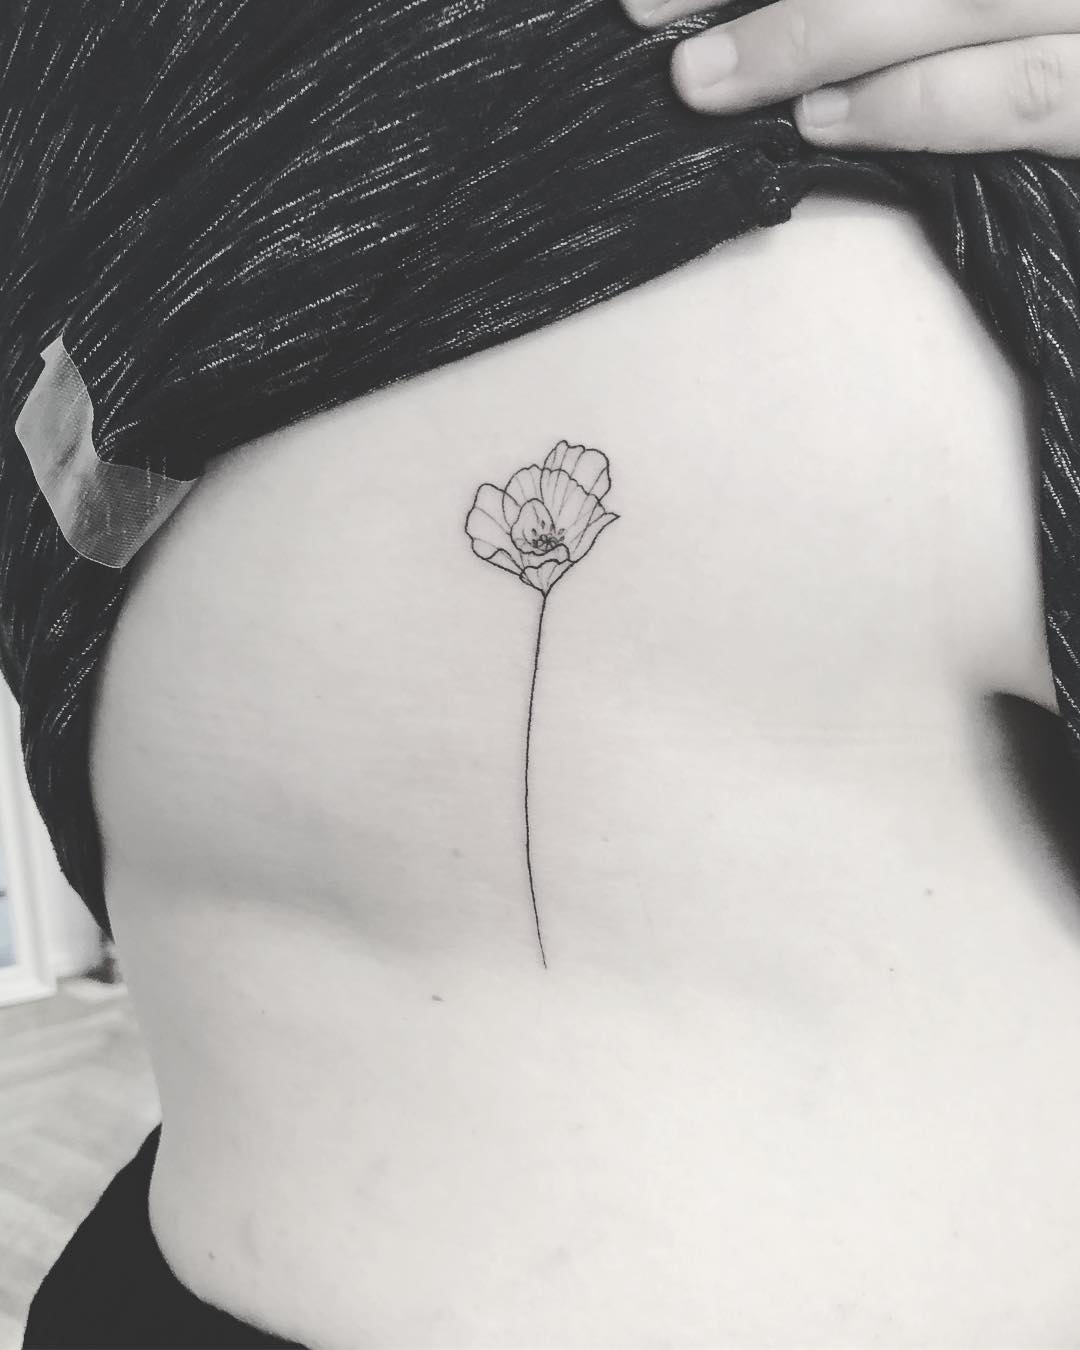 A thin poppy tattoo by Annelie Fransson